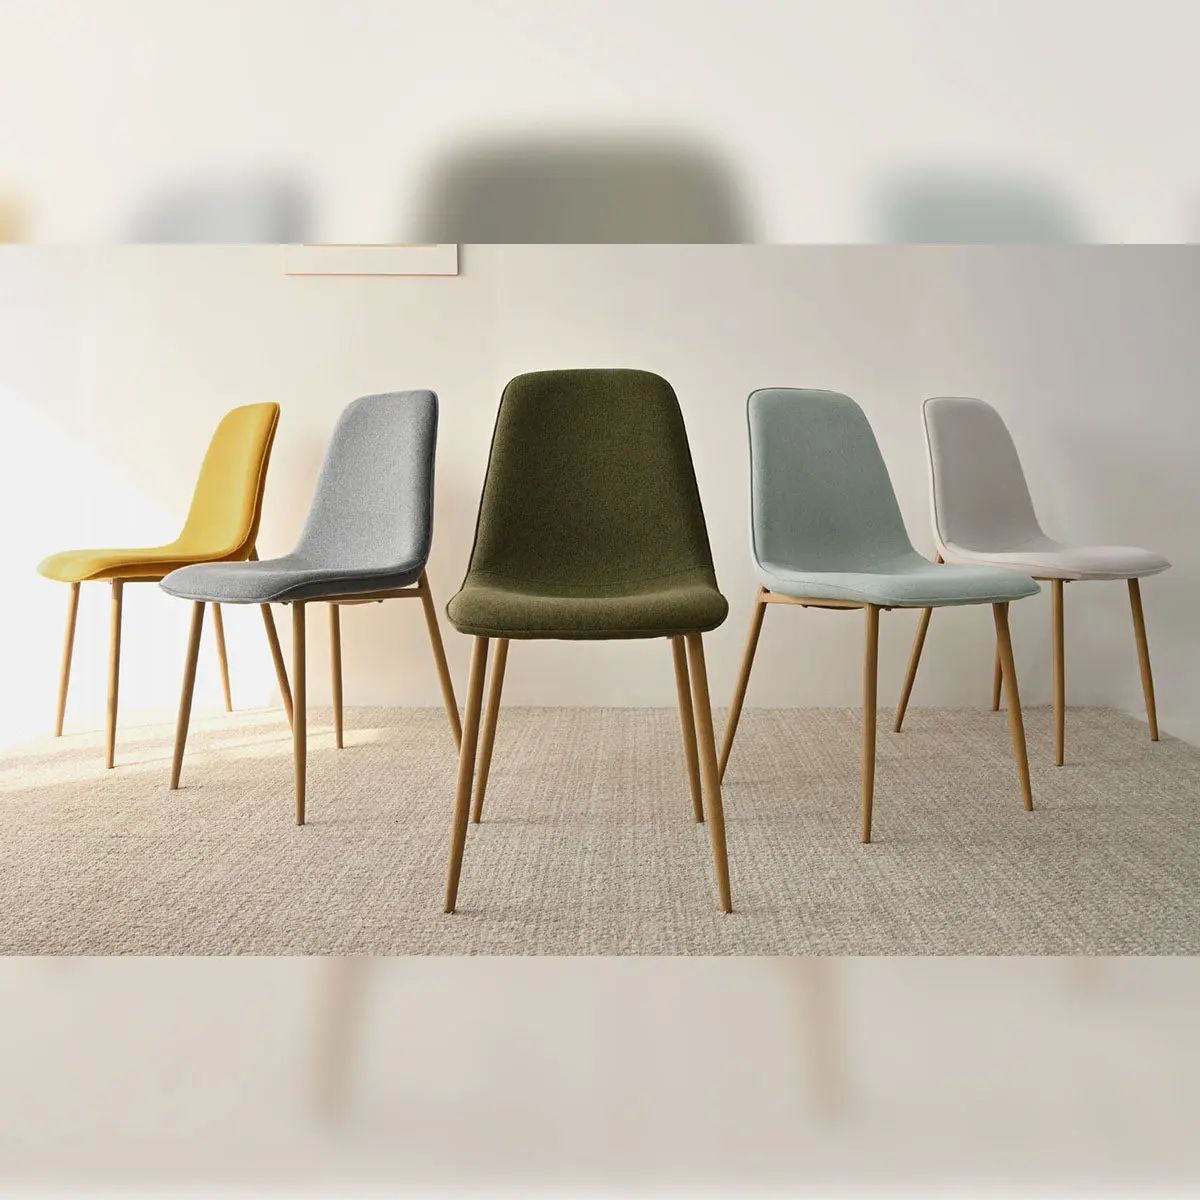 Oslo Dining Chairs with Oak Legs, Dining Chair Set of 4 | The Pop Maison